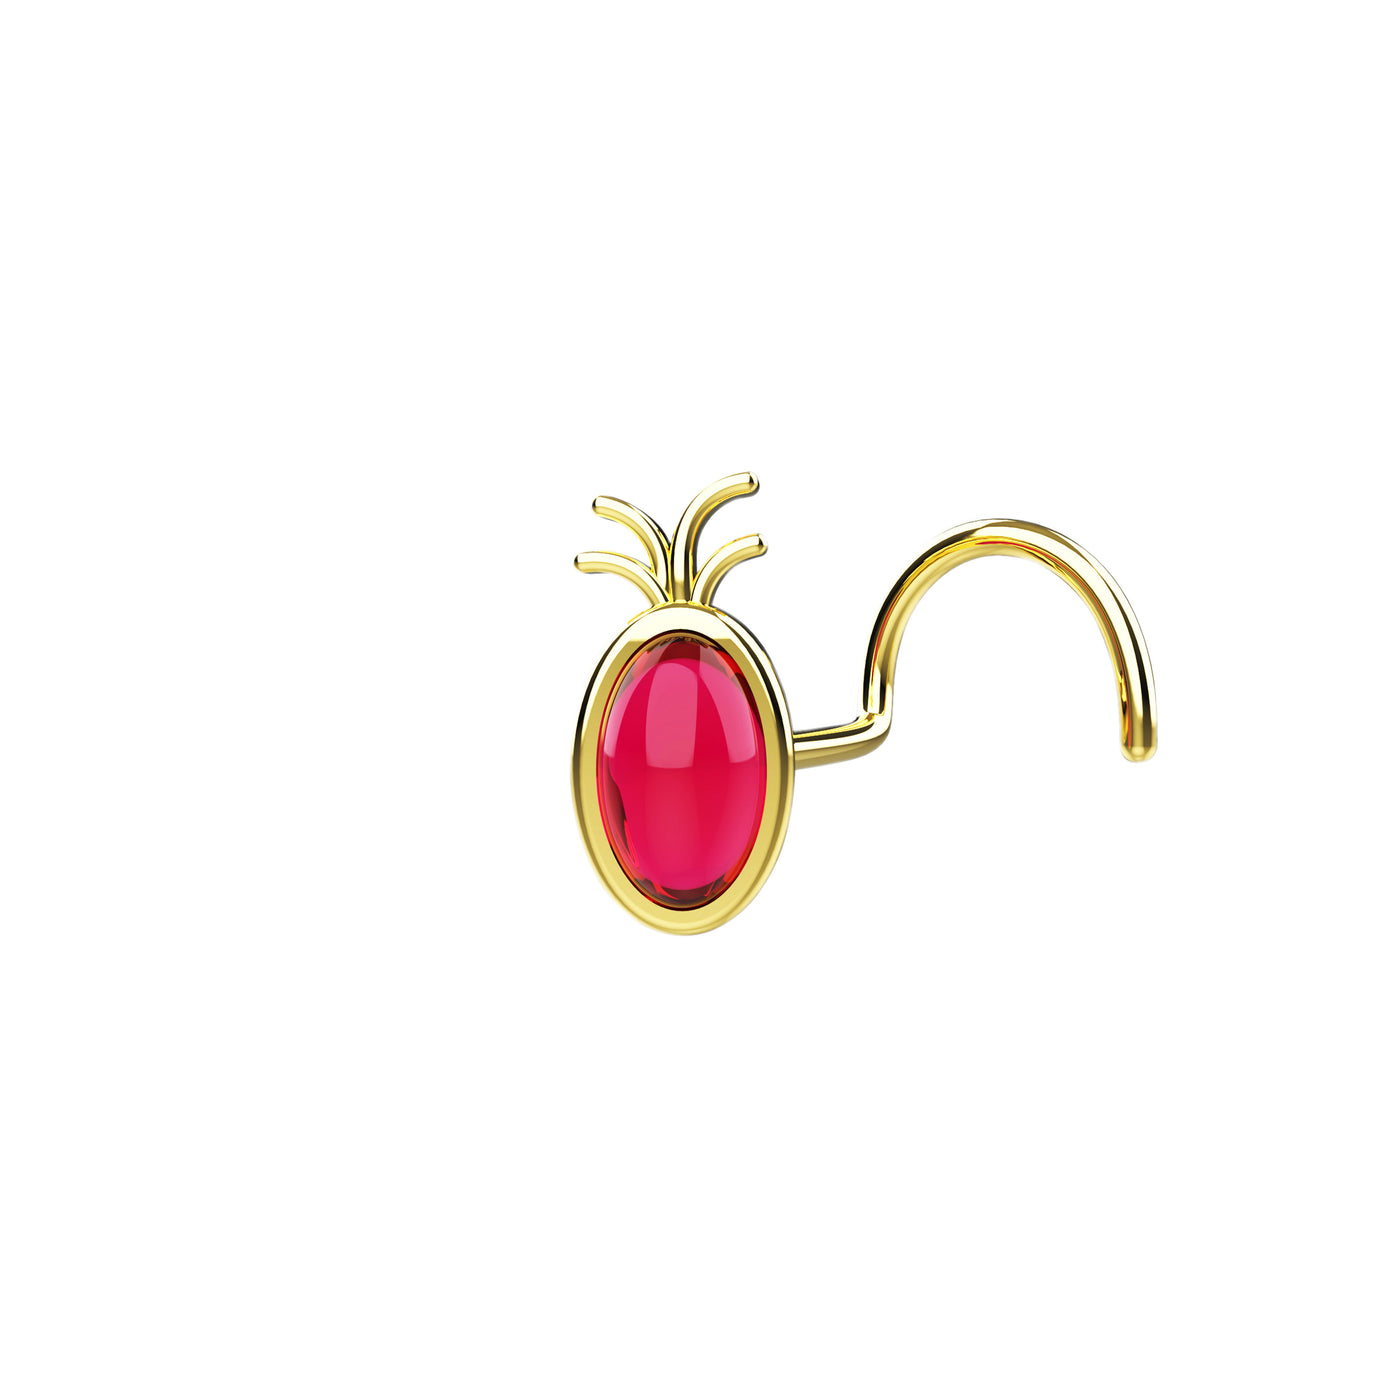 Pineapple Gold Nose Stud